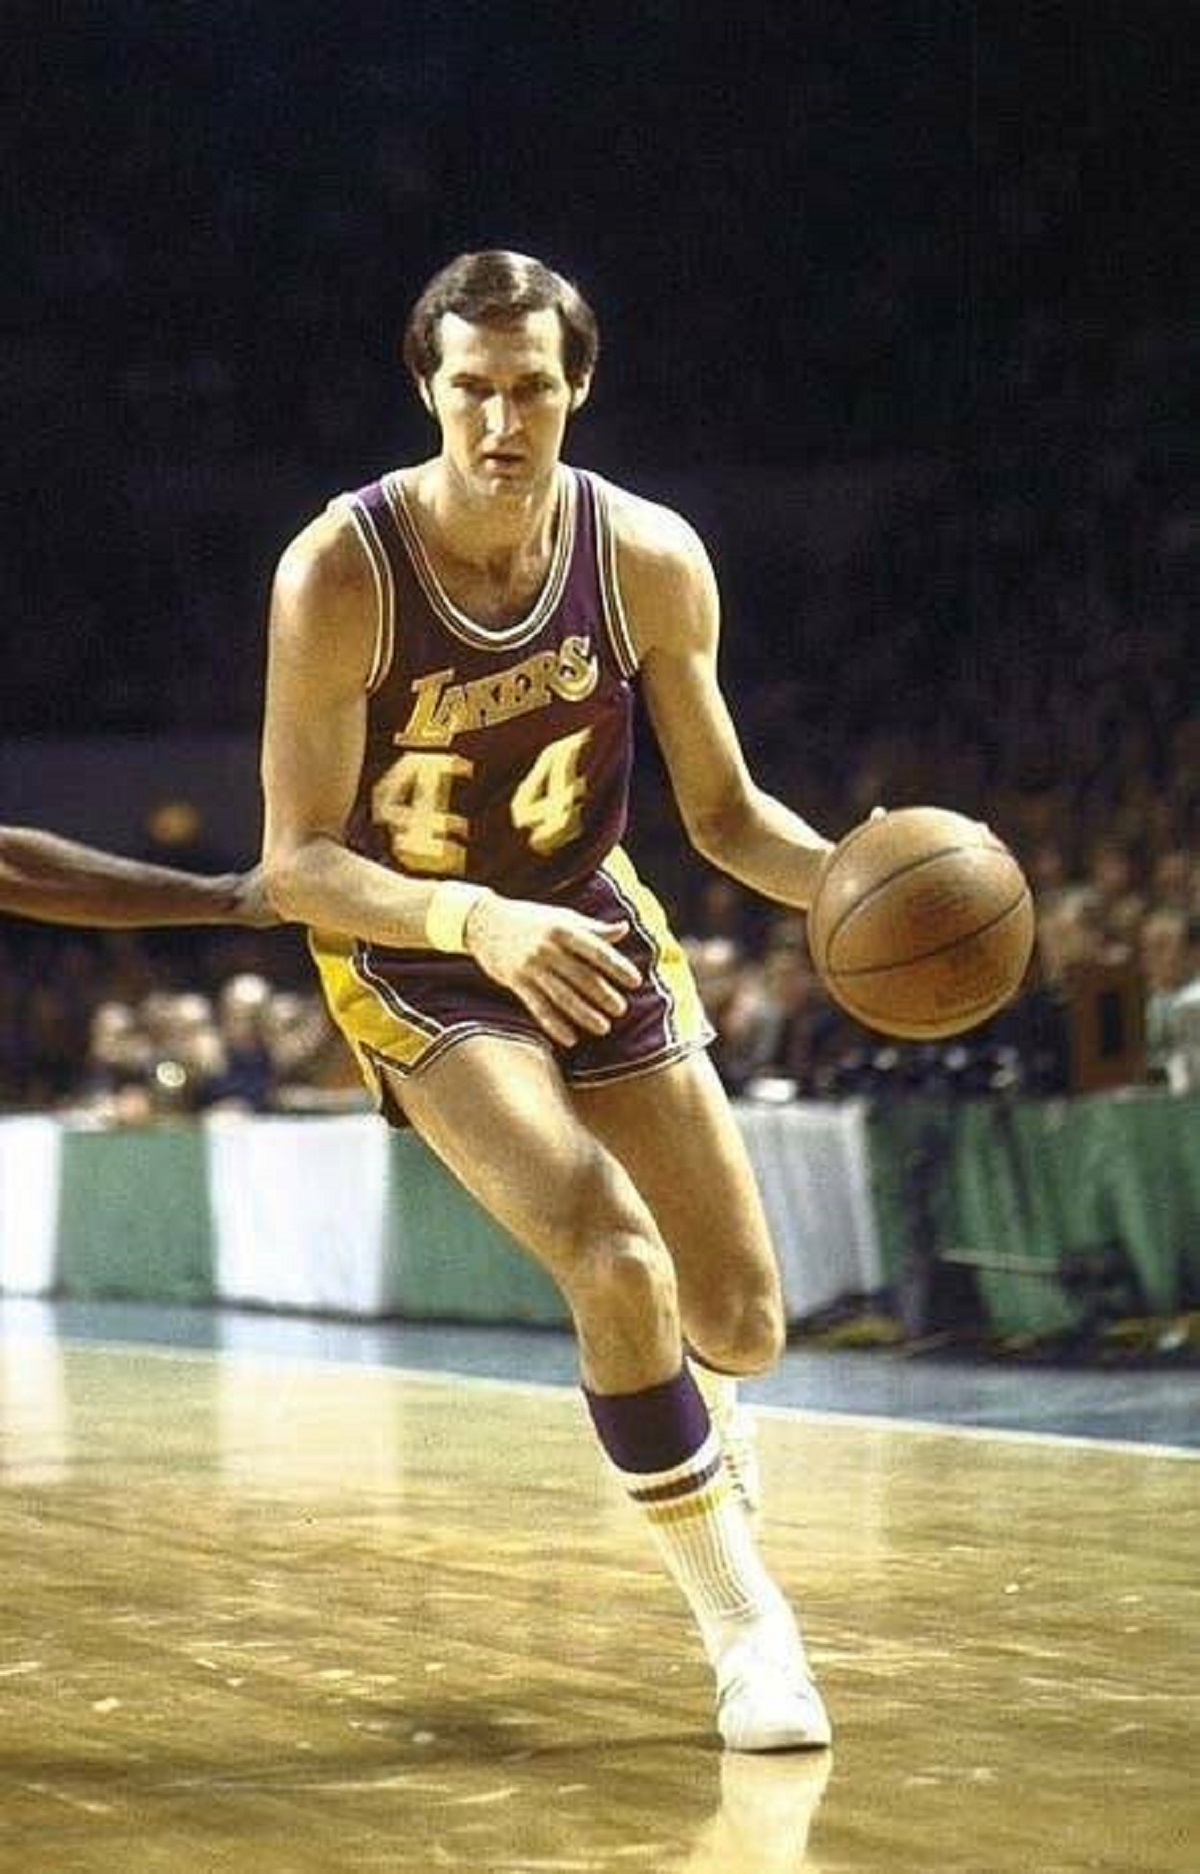 Here's the player (Jerry West) that the NBA logo is reportedly based on.